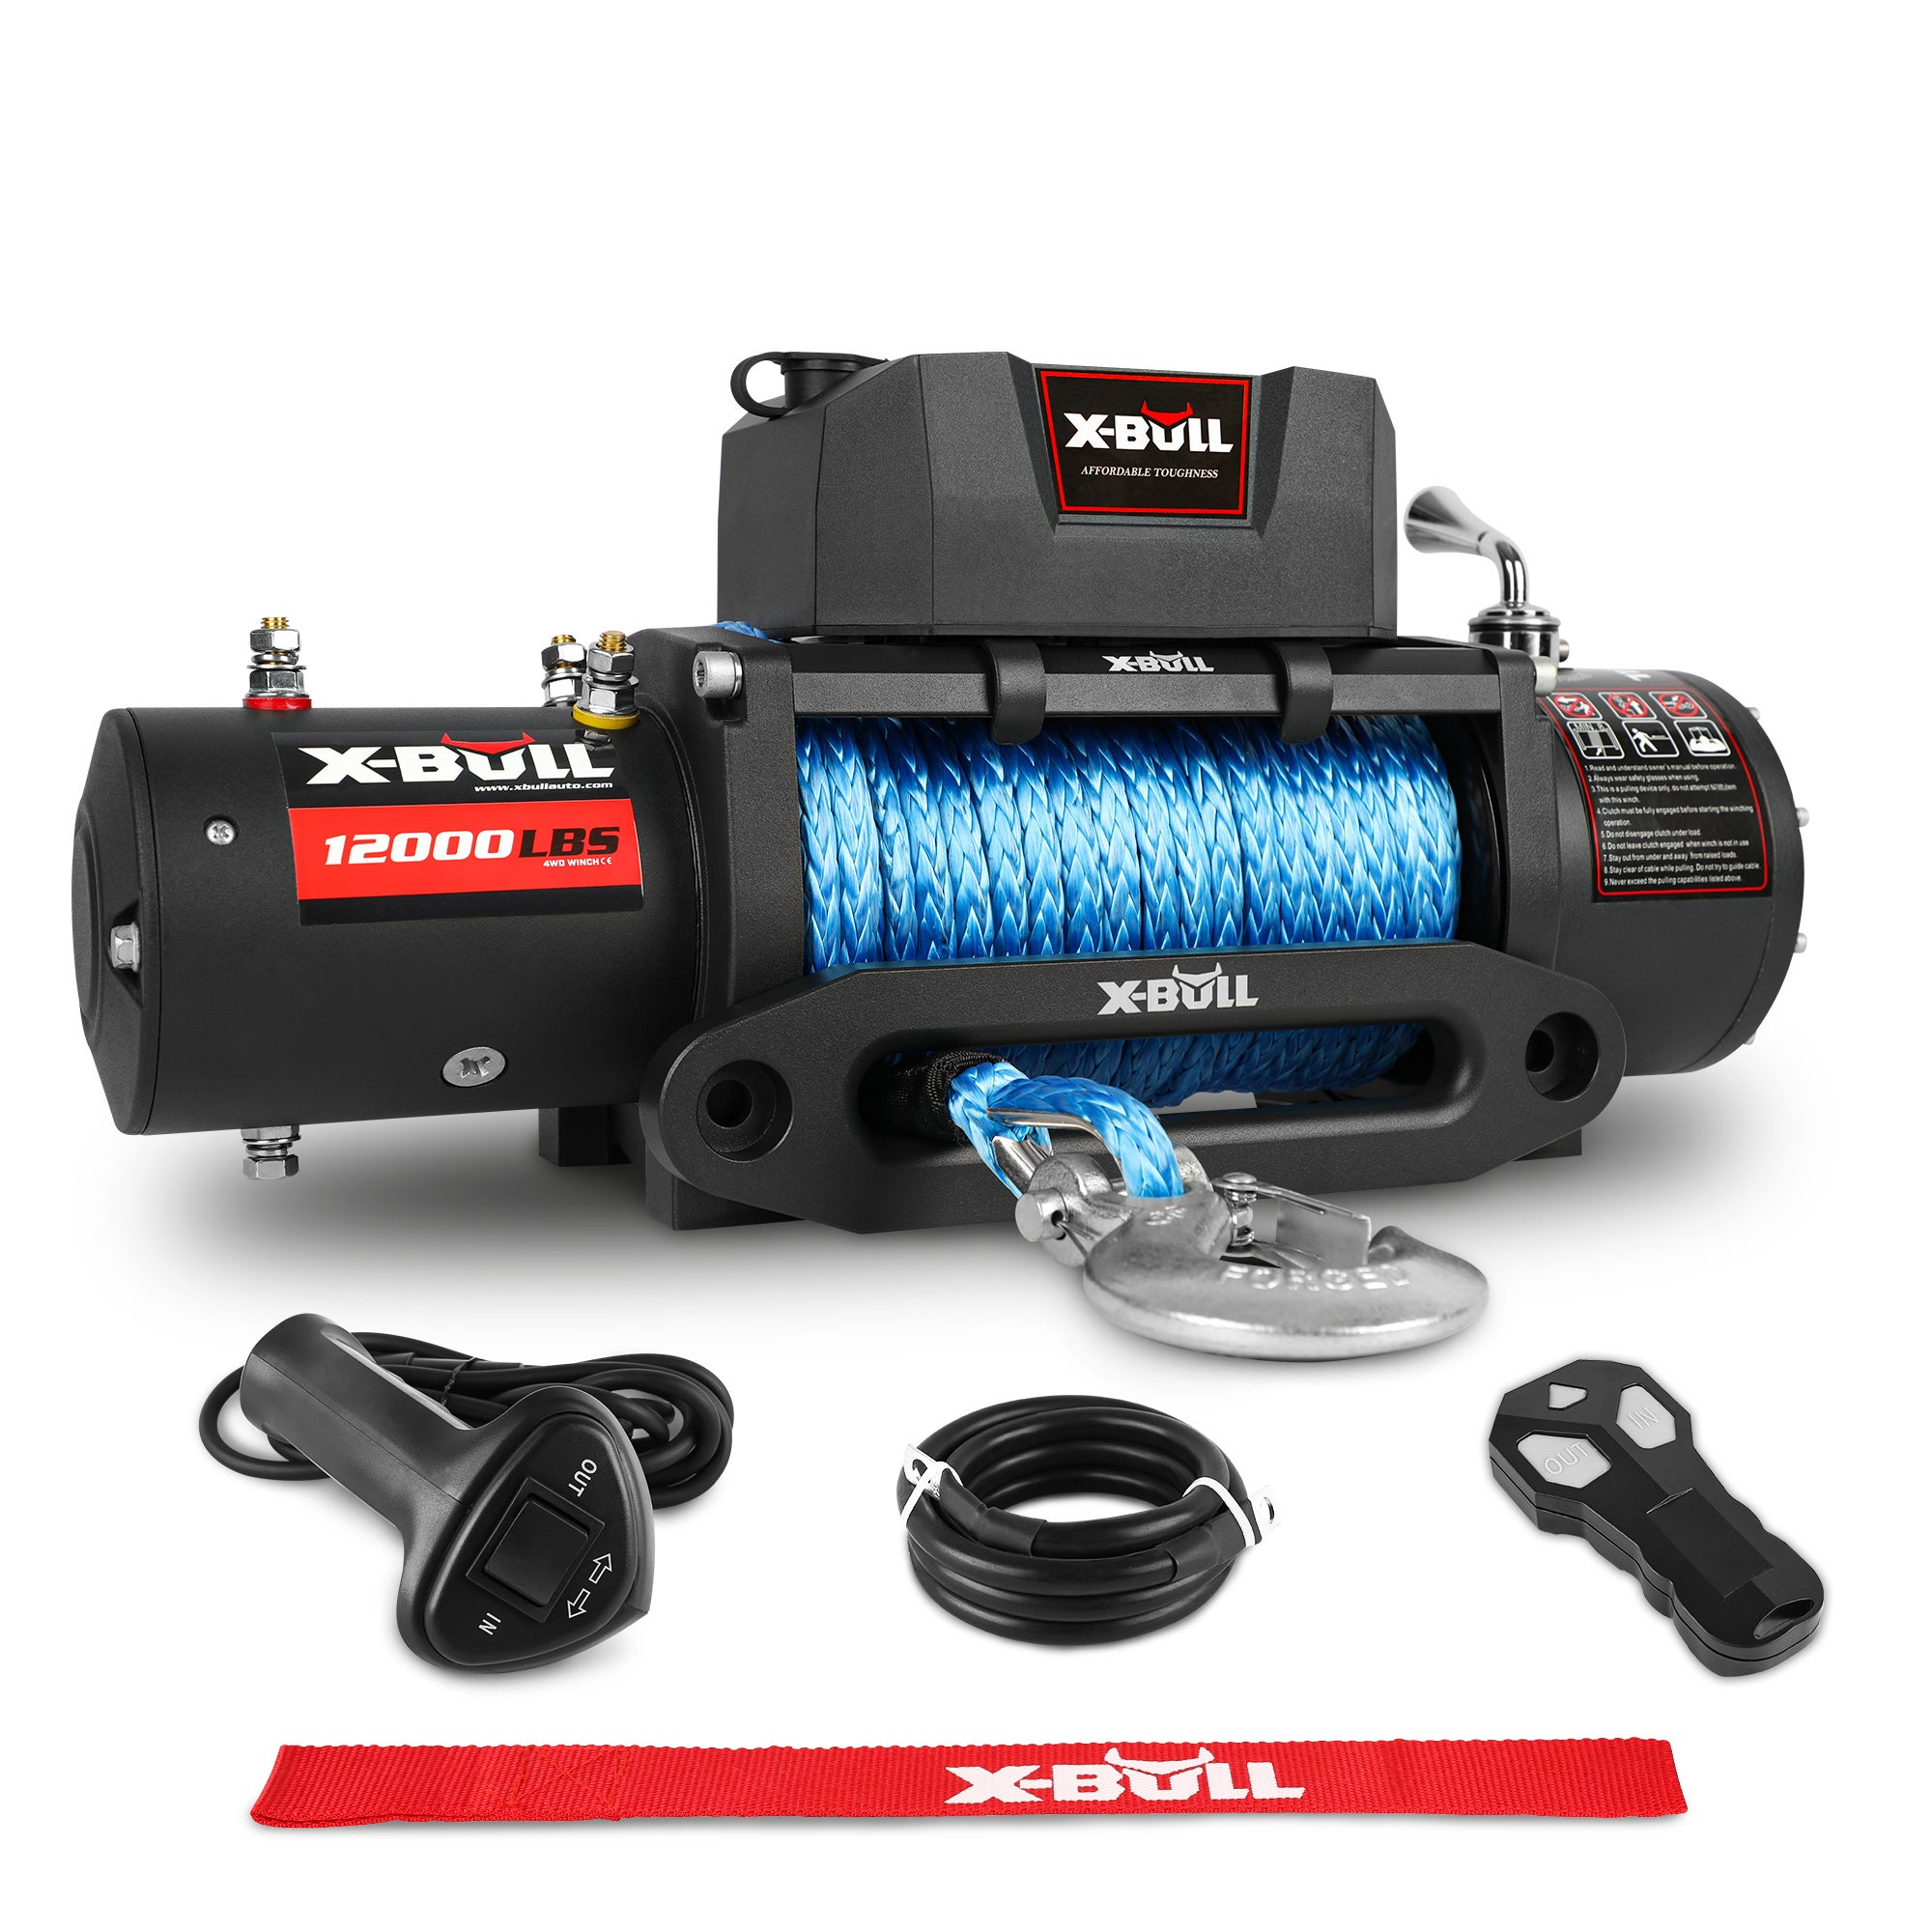 X-BULL 12000LBS Electric Winch 12V 5454kg 24M Synthetic Rope NEW 24M